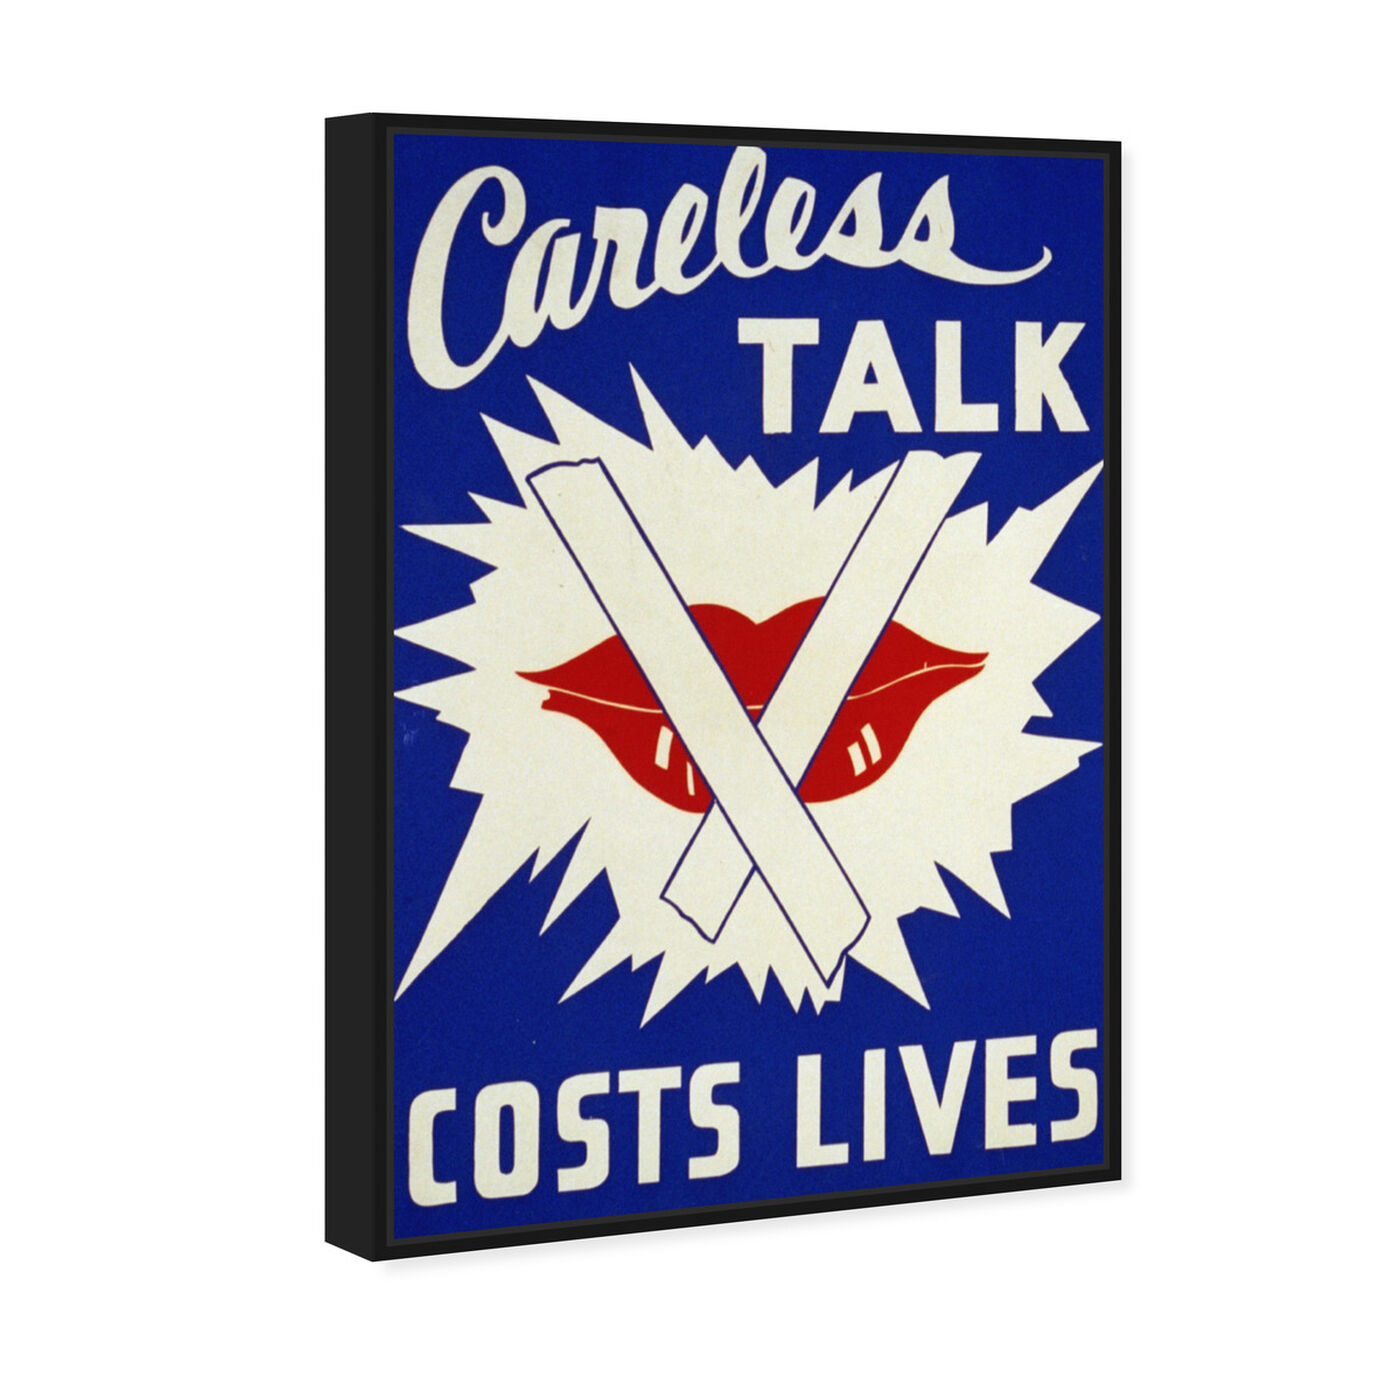 Angled view of Careless Talk featuring advertising and posters art.